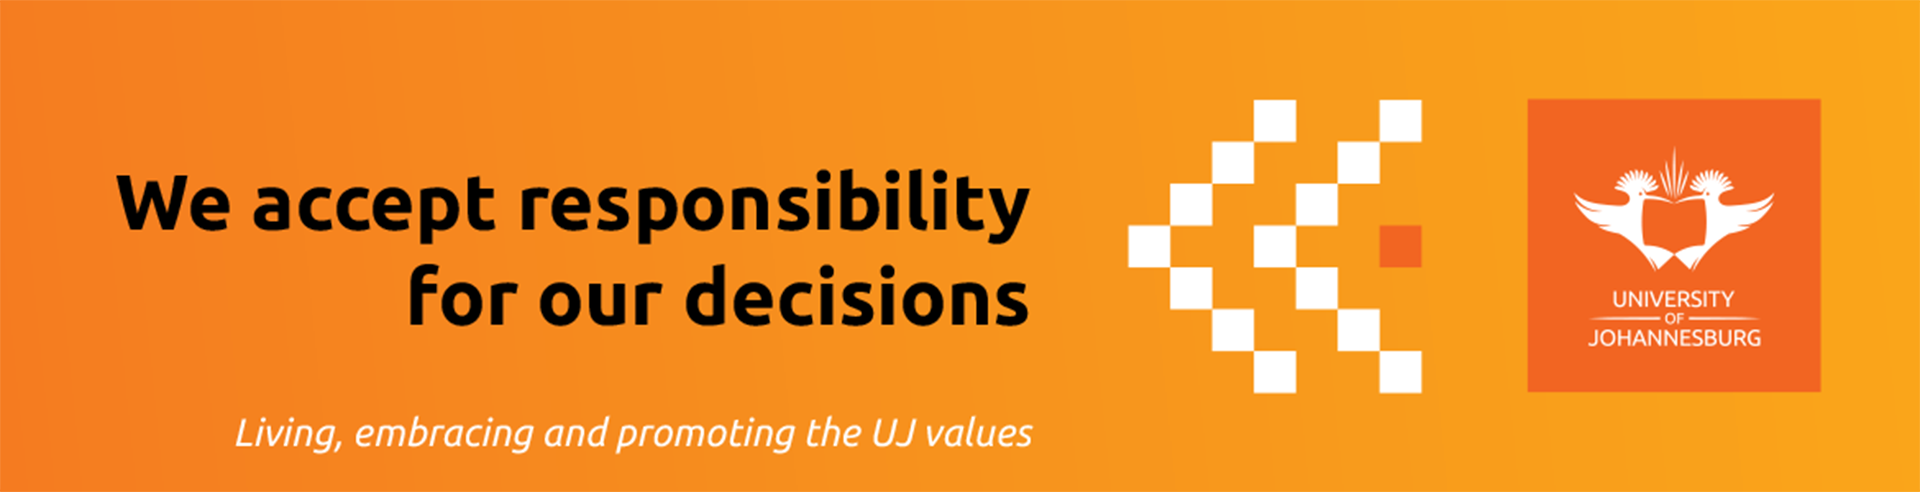 Uj Values Expressions Posters 2020 Ulink 1170x300mm 29